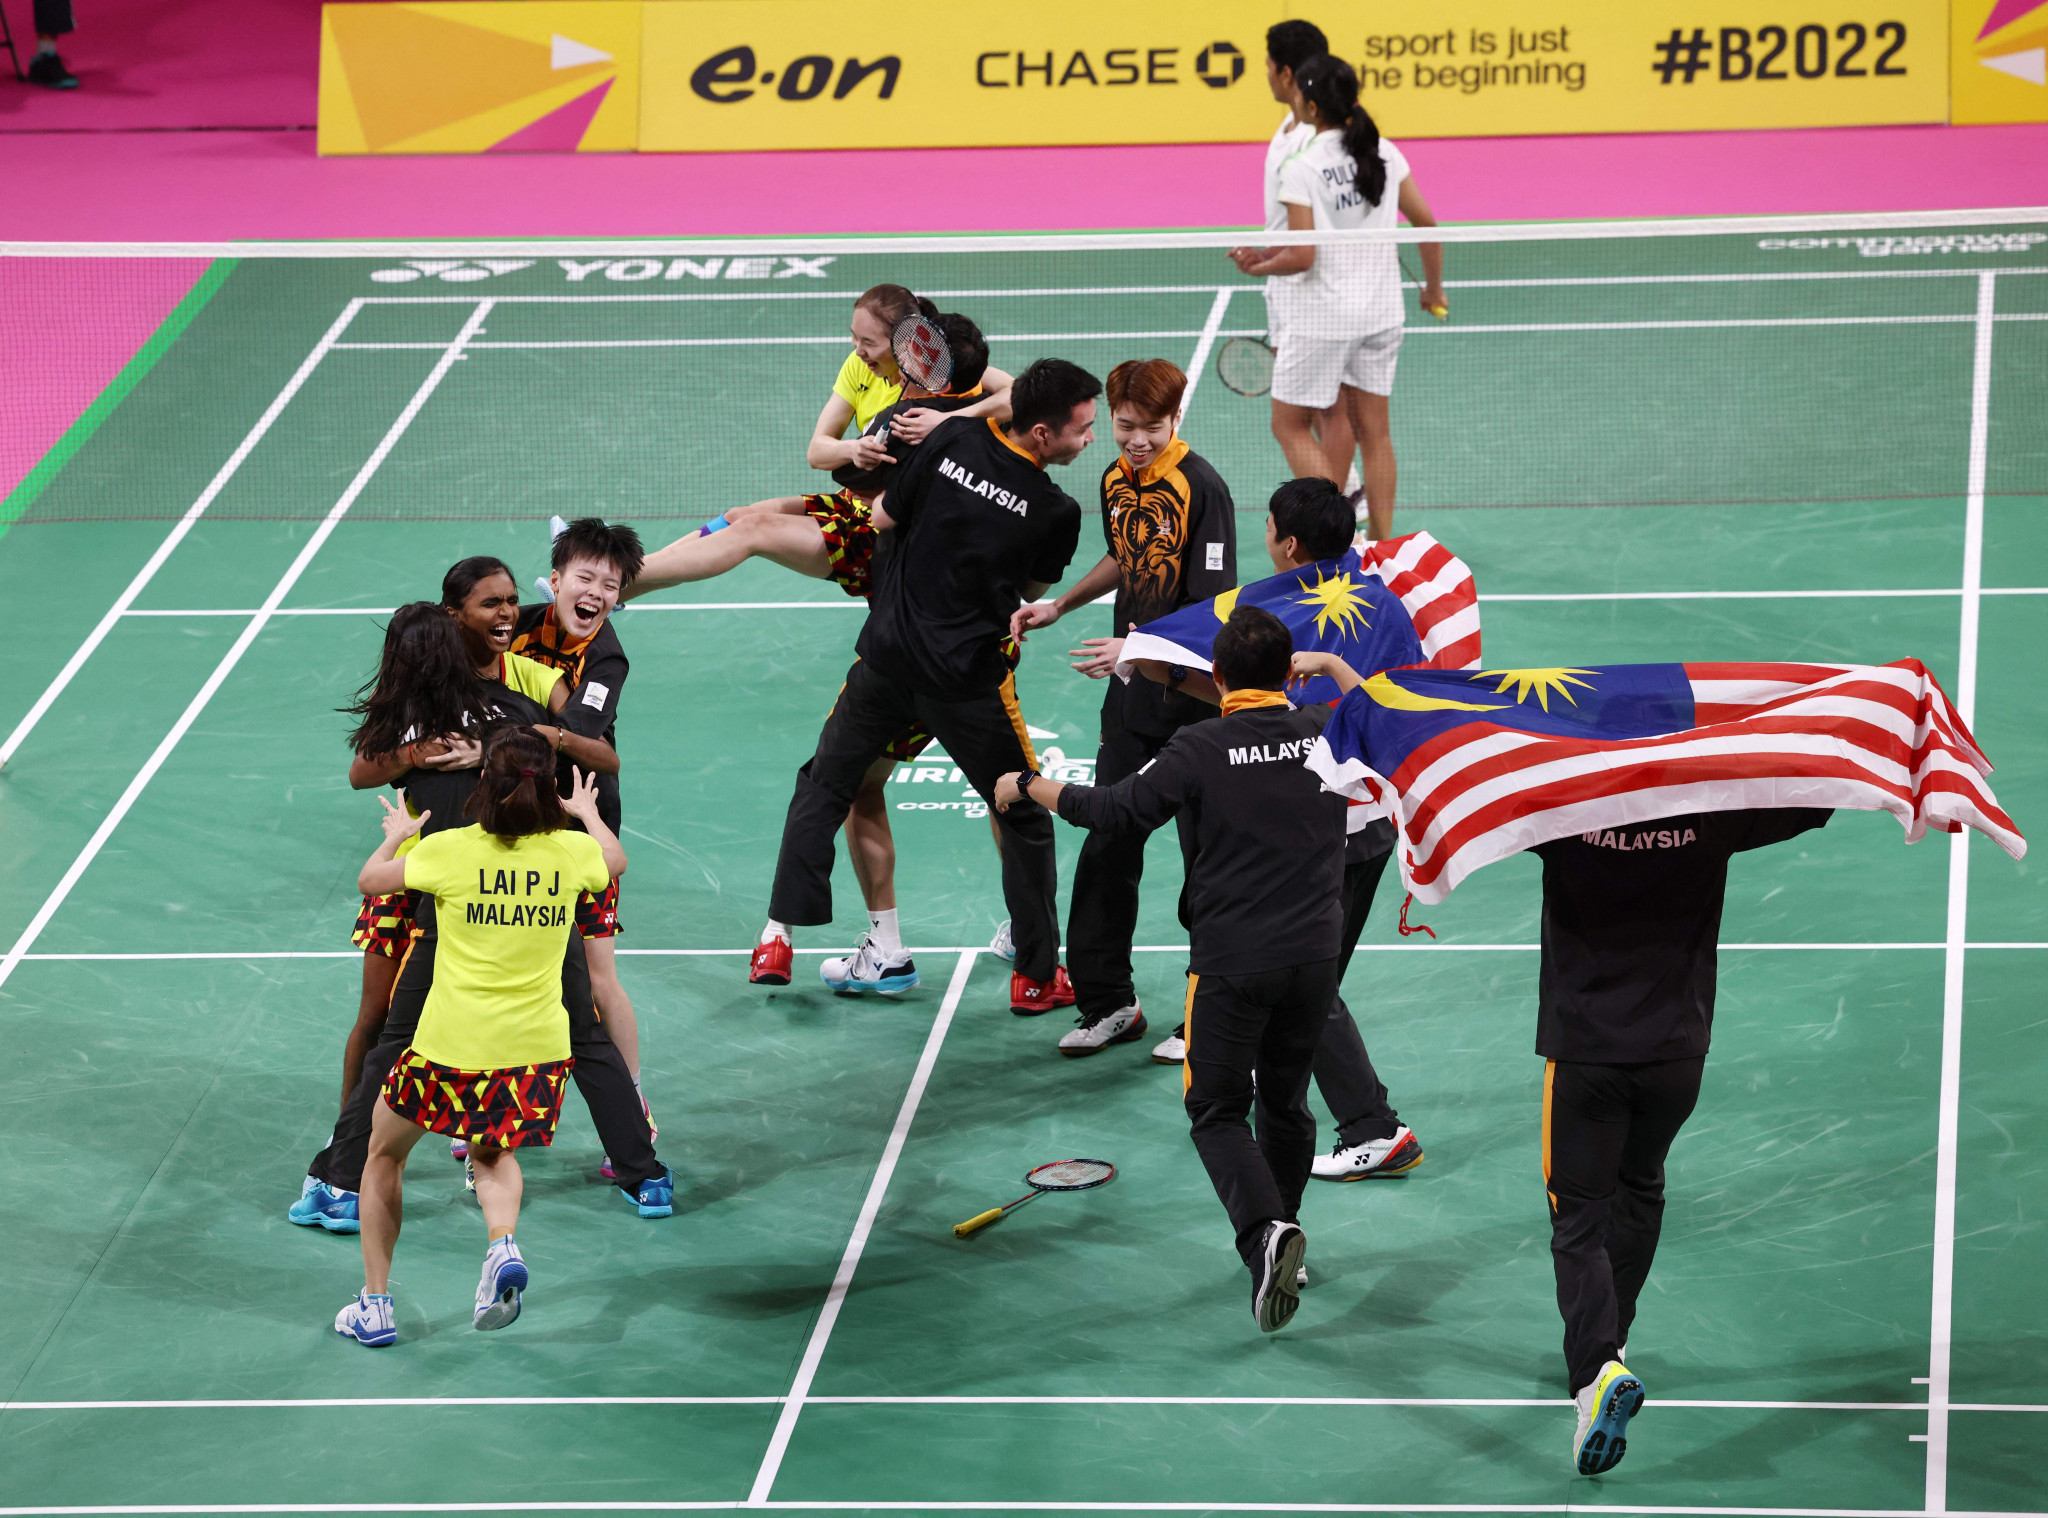 Malaysia beat India 3-1 to win mixed team badminton gold at Birmingham 2022 ©Getty Images